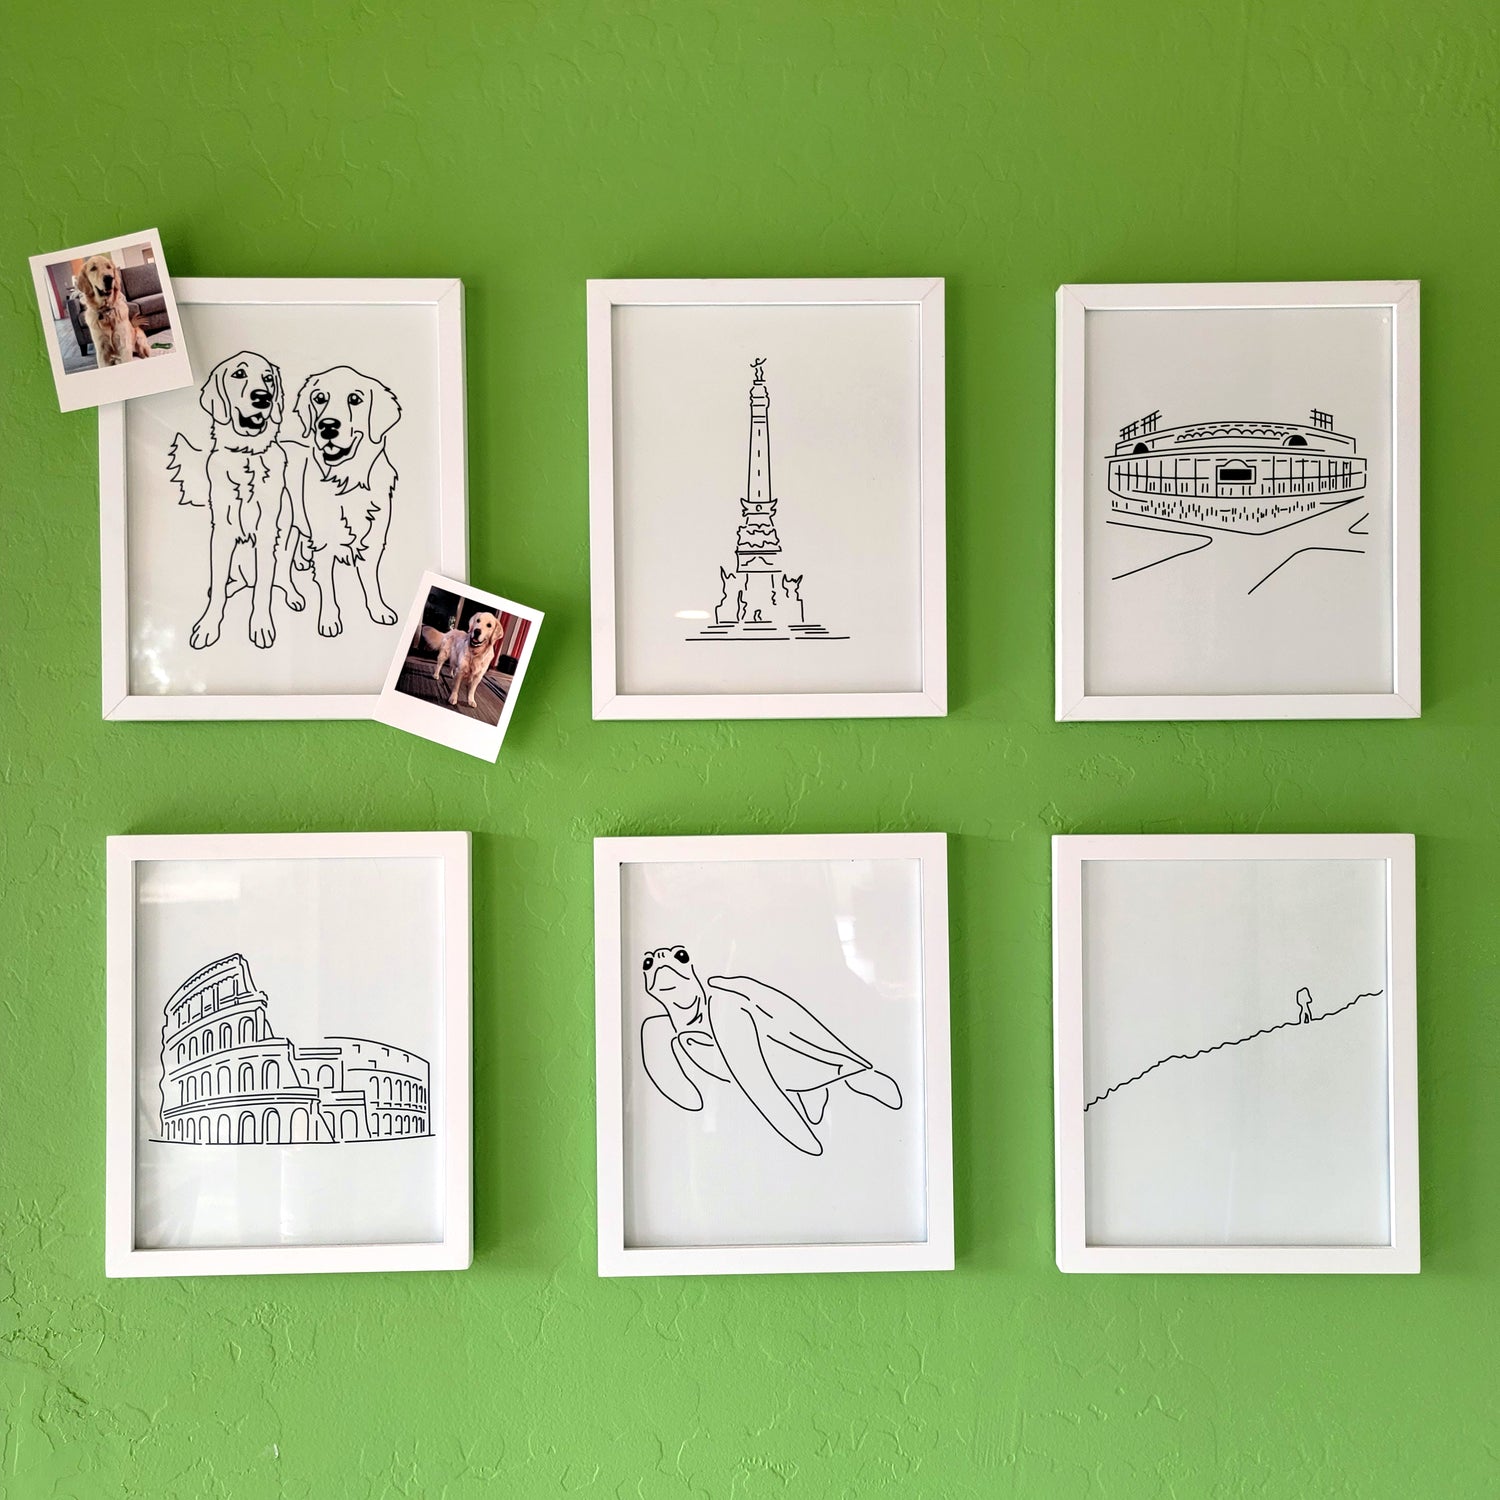 A group of six framed drawings on a green wall.  The line art drawings include two Golden Retrievers, the Soldiers and Sailors Monument, Wrigley Field, the Colosseum, a Sea Turtle, and a person Hiking